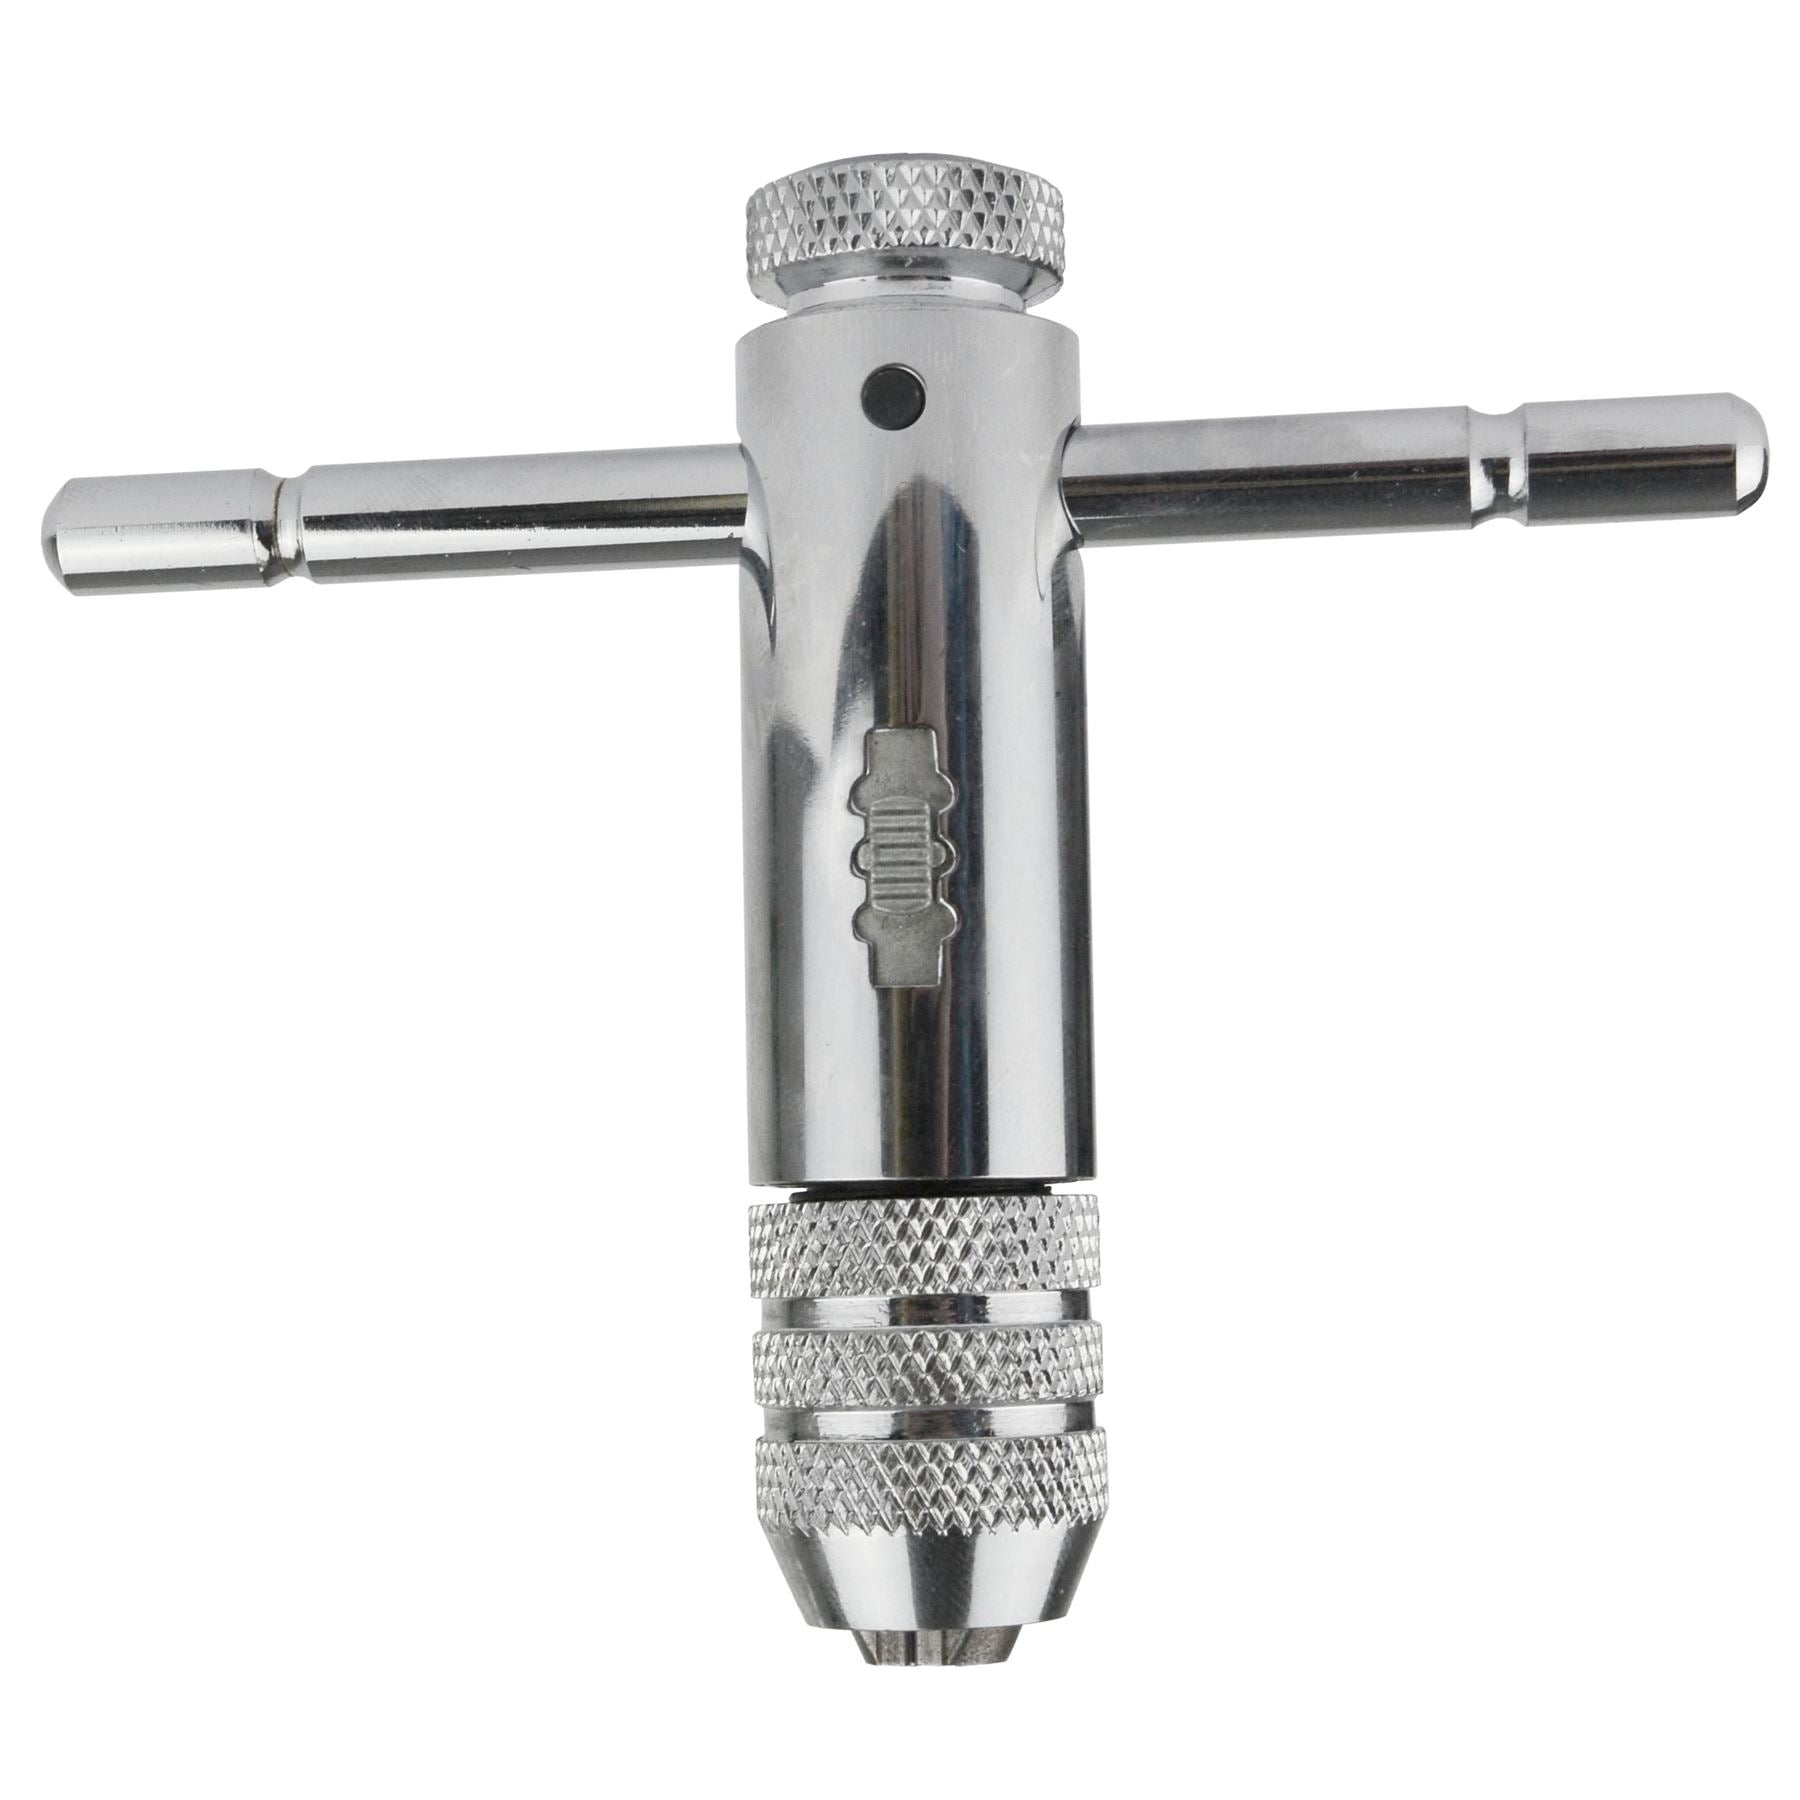 M5 - M12 Ratchet Tap Wrench Tap And Die Reversible T Bar Handle BERGEN AT214